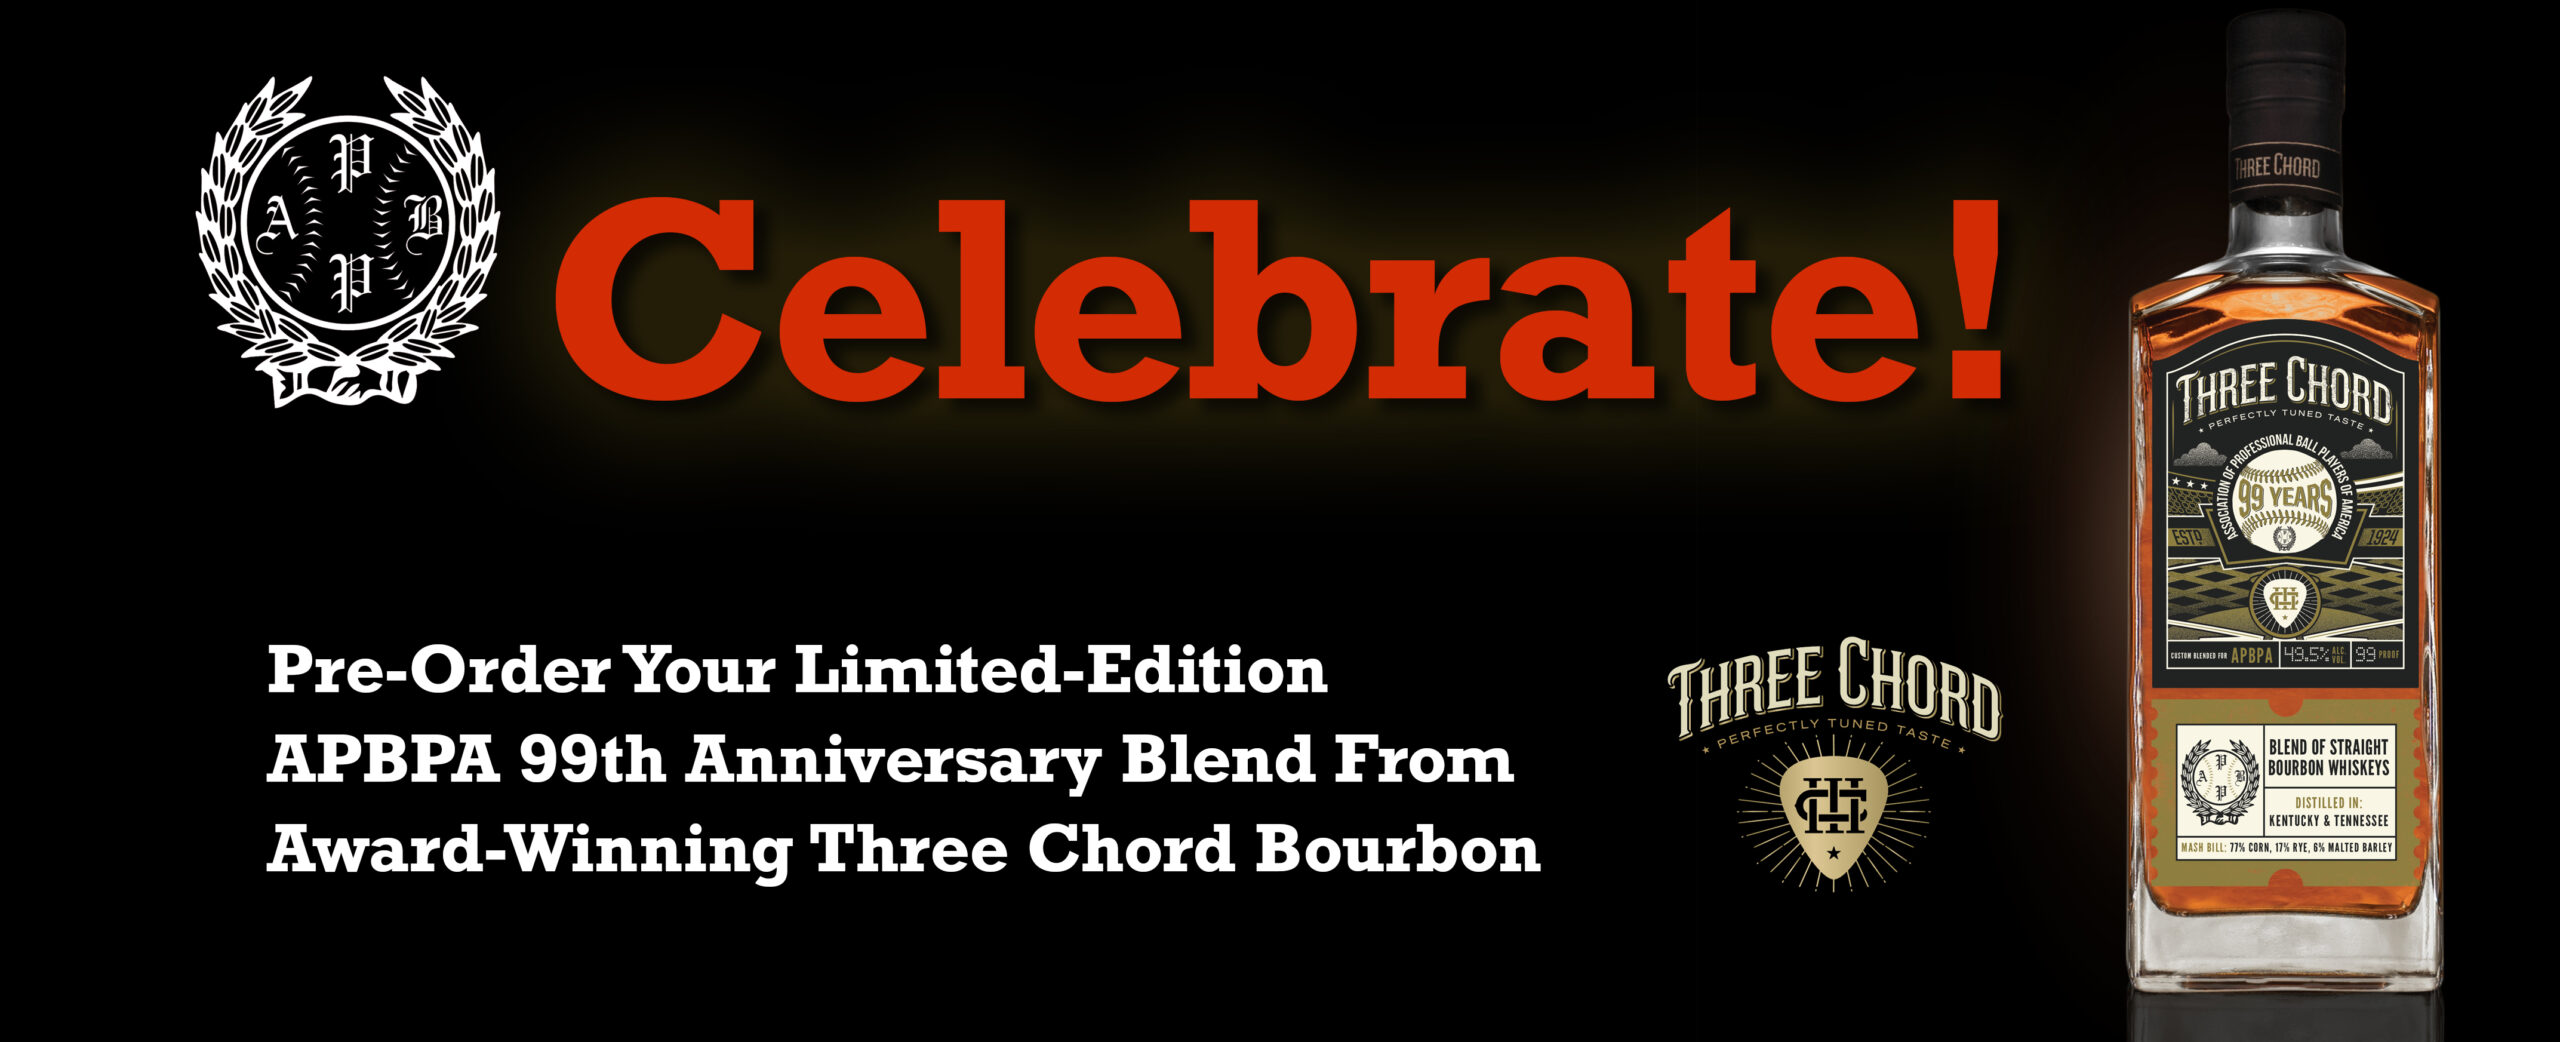 Celebrate! Pre-Order Your Limited-Edition APBPA 99th Anniversary Blend From Award-Winning Three Chord Bourbon